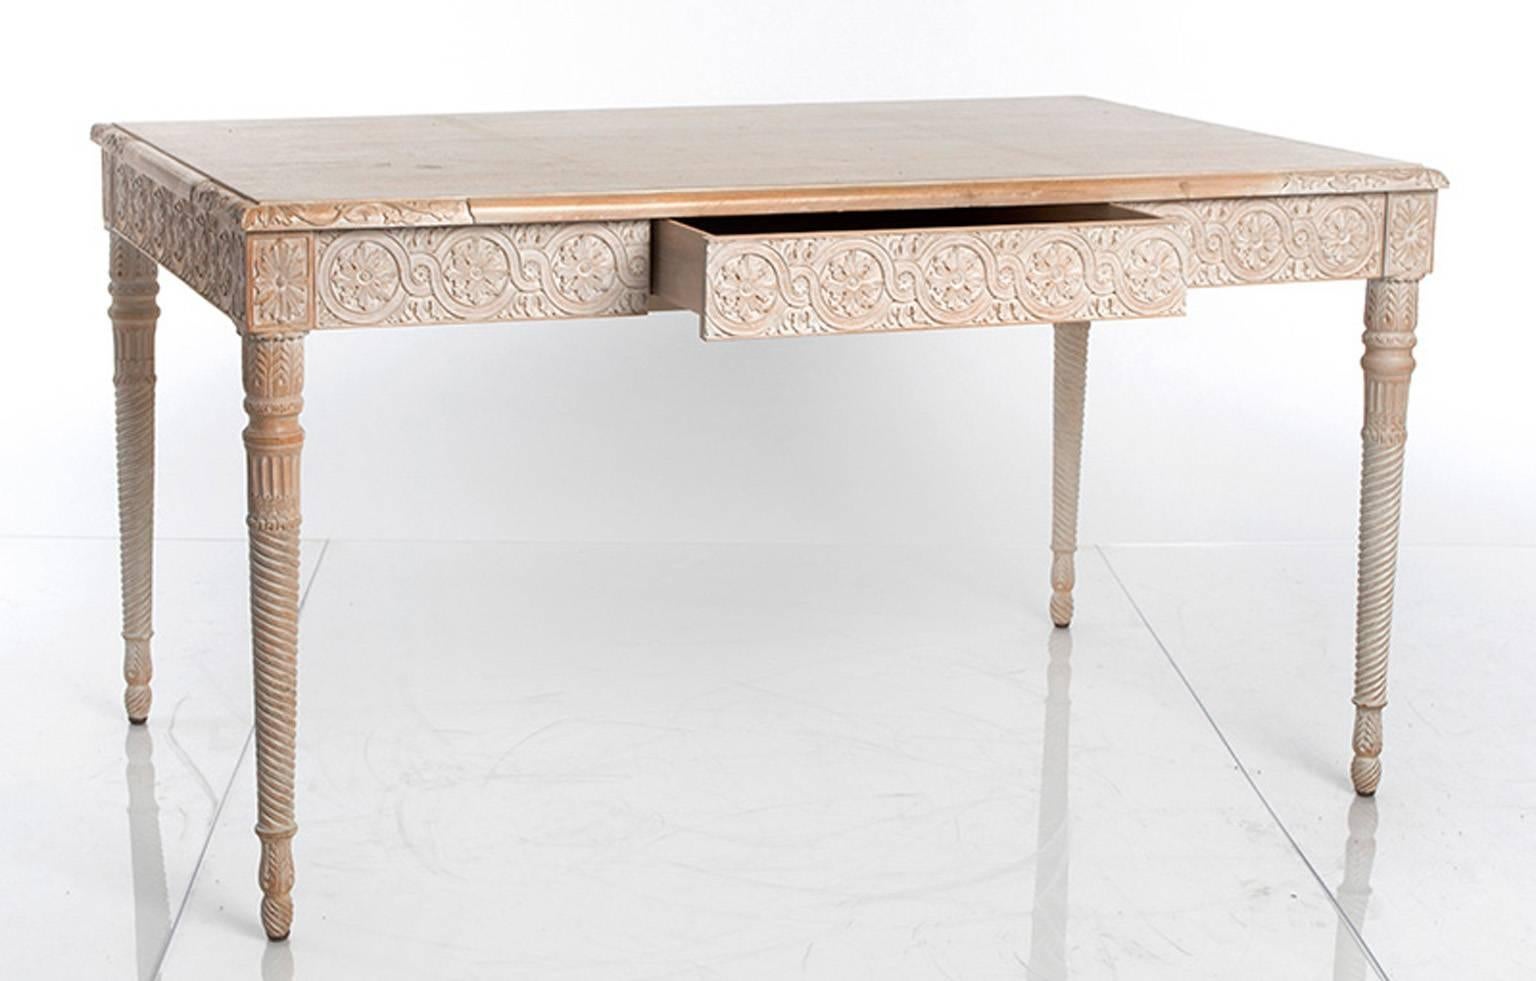 Swedish style table with a single drawer. The apron and corners are decorated with carved rosettes.
 